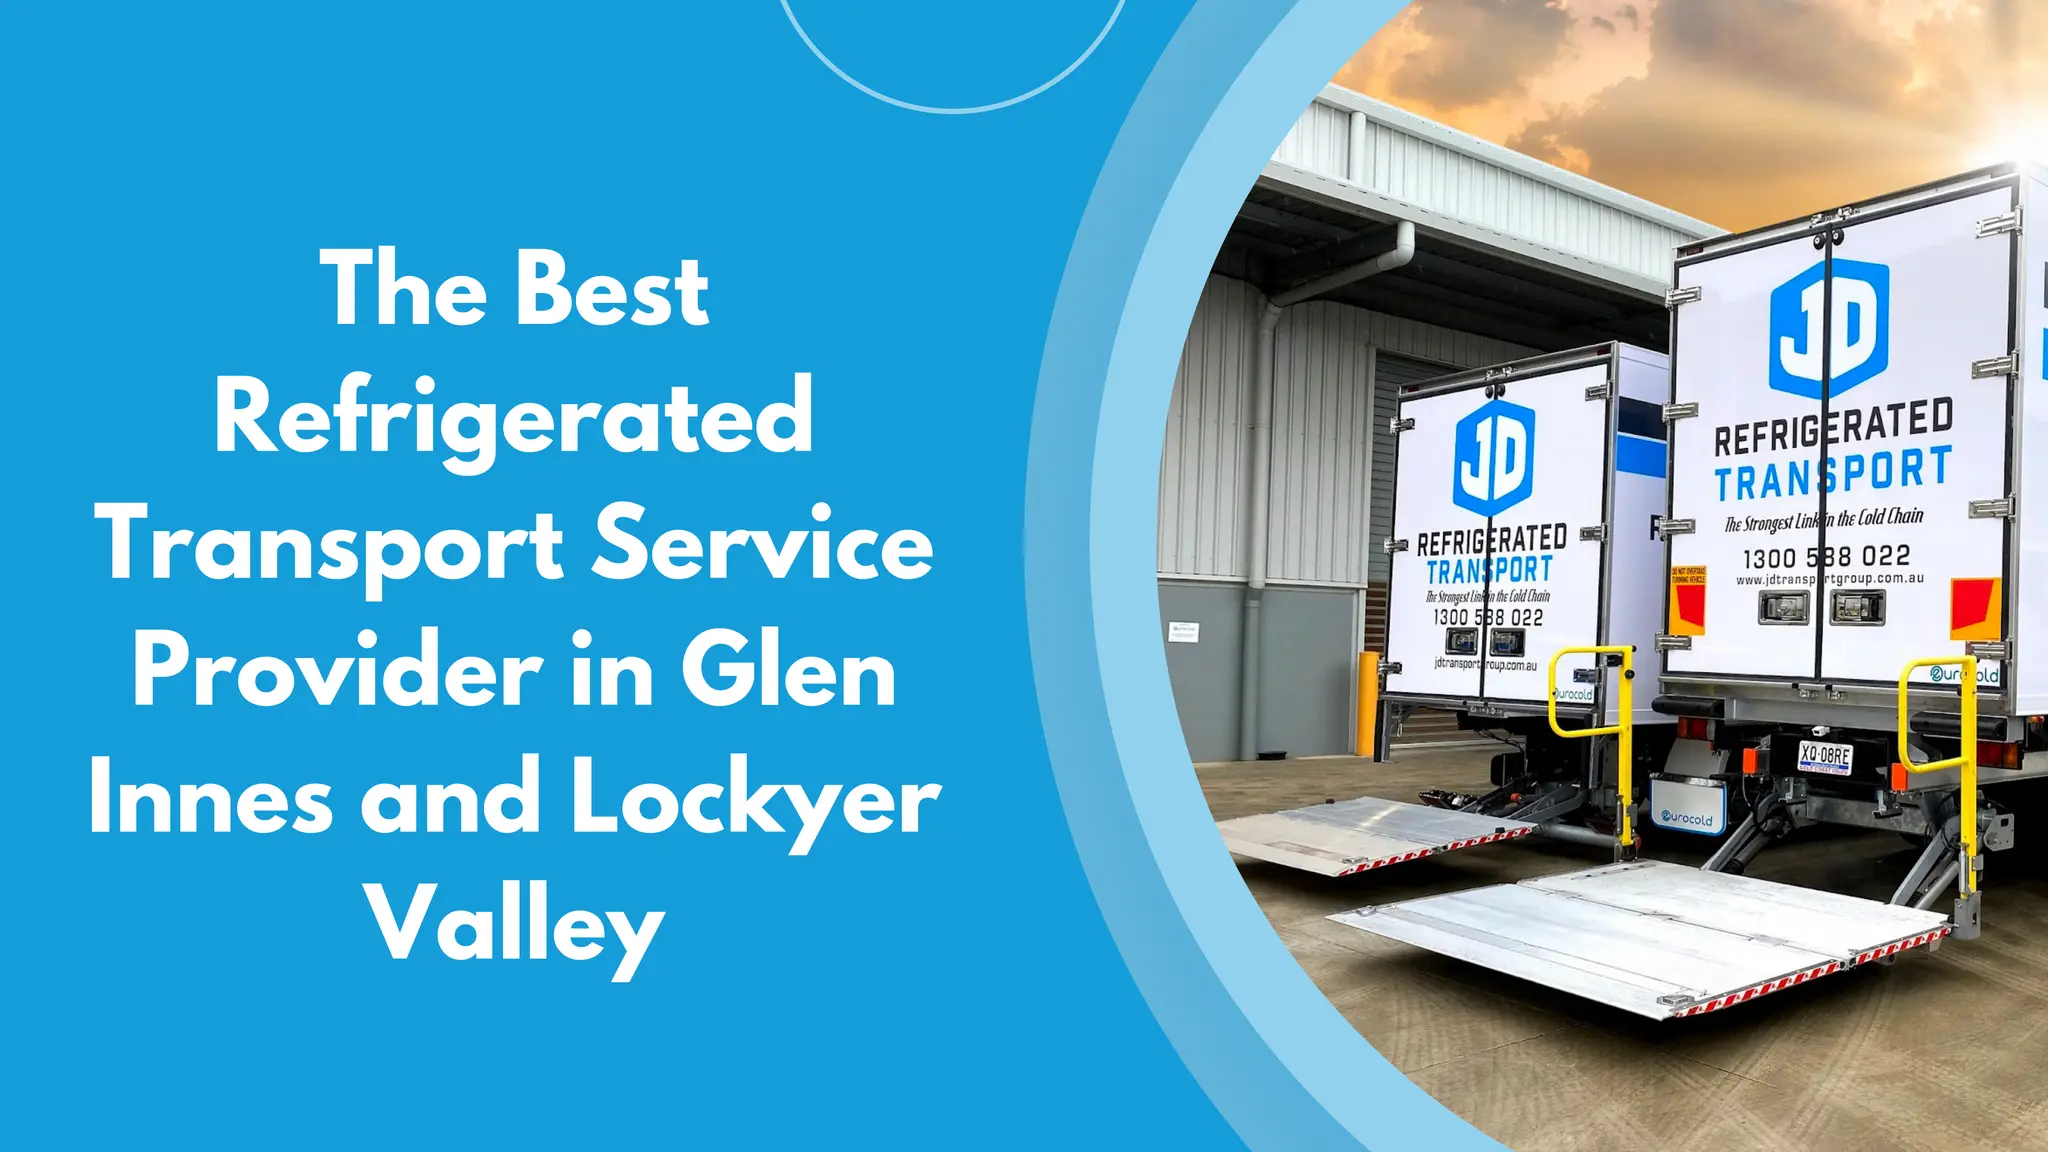 The Best Refrigerated Transport Service Provider in Glen Innes and Lockyer Valley